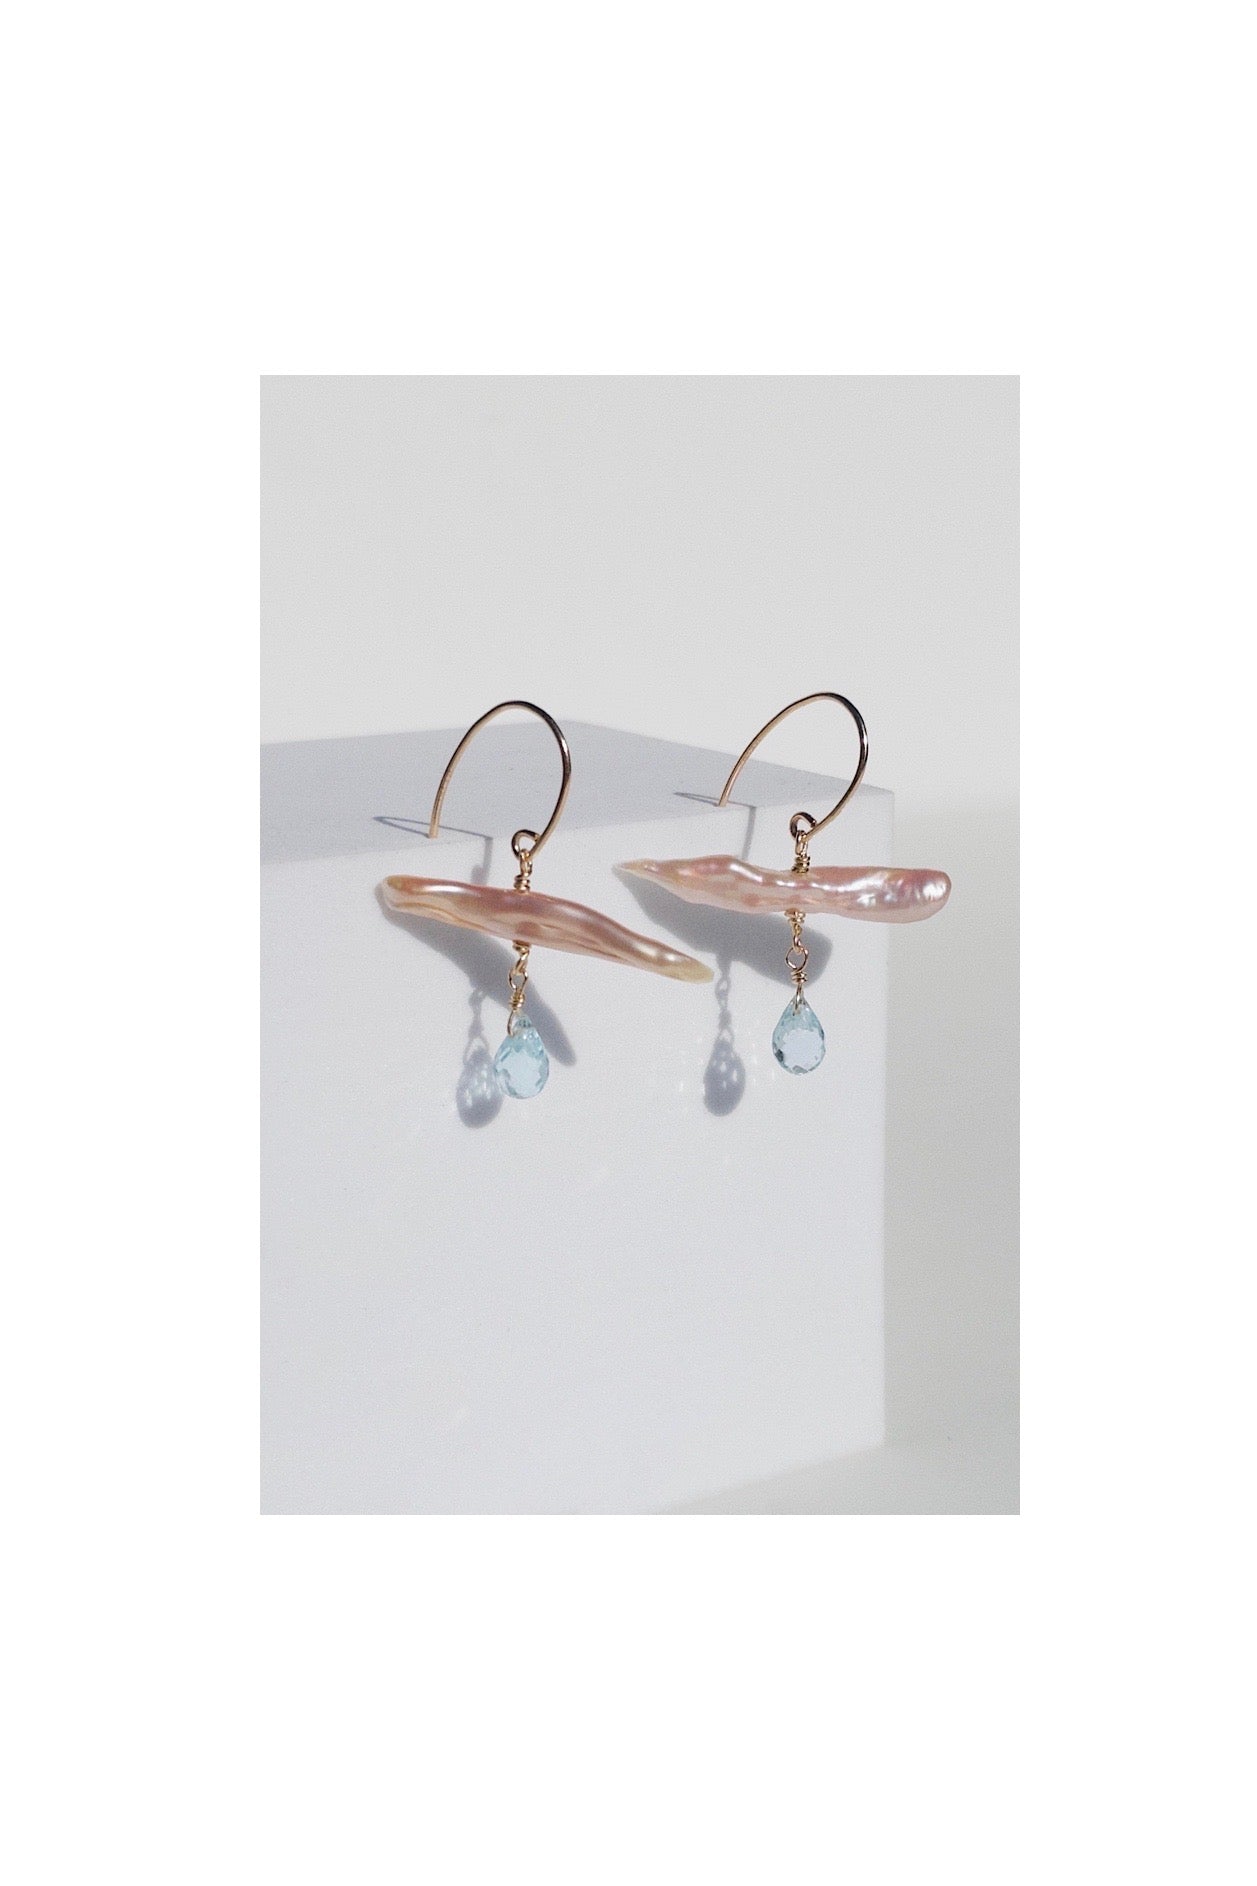 Comet Earrings with Blue Topaz